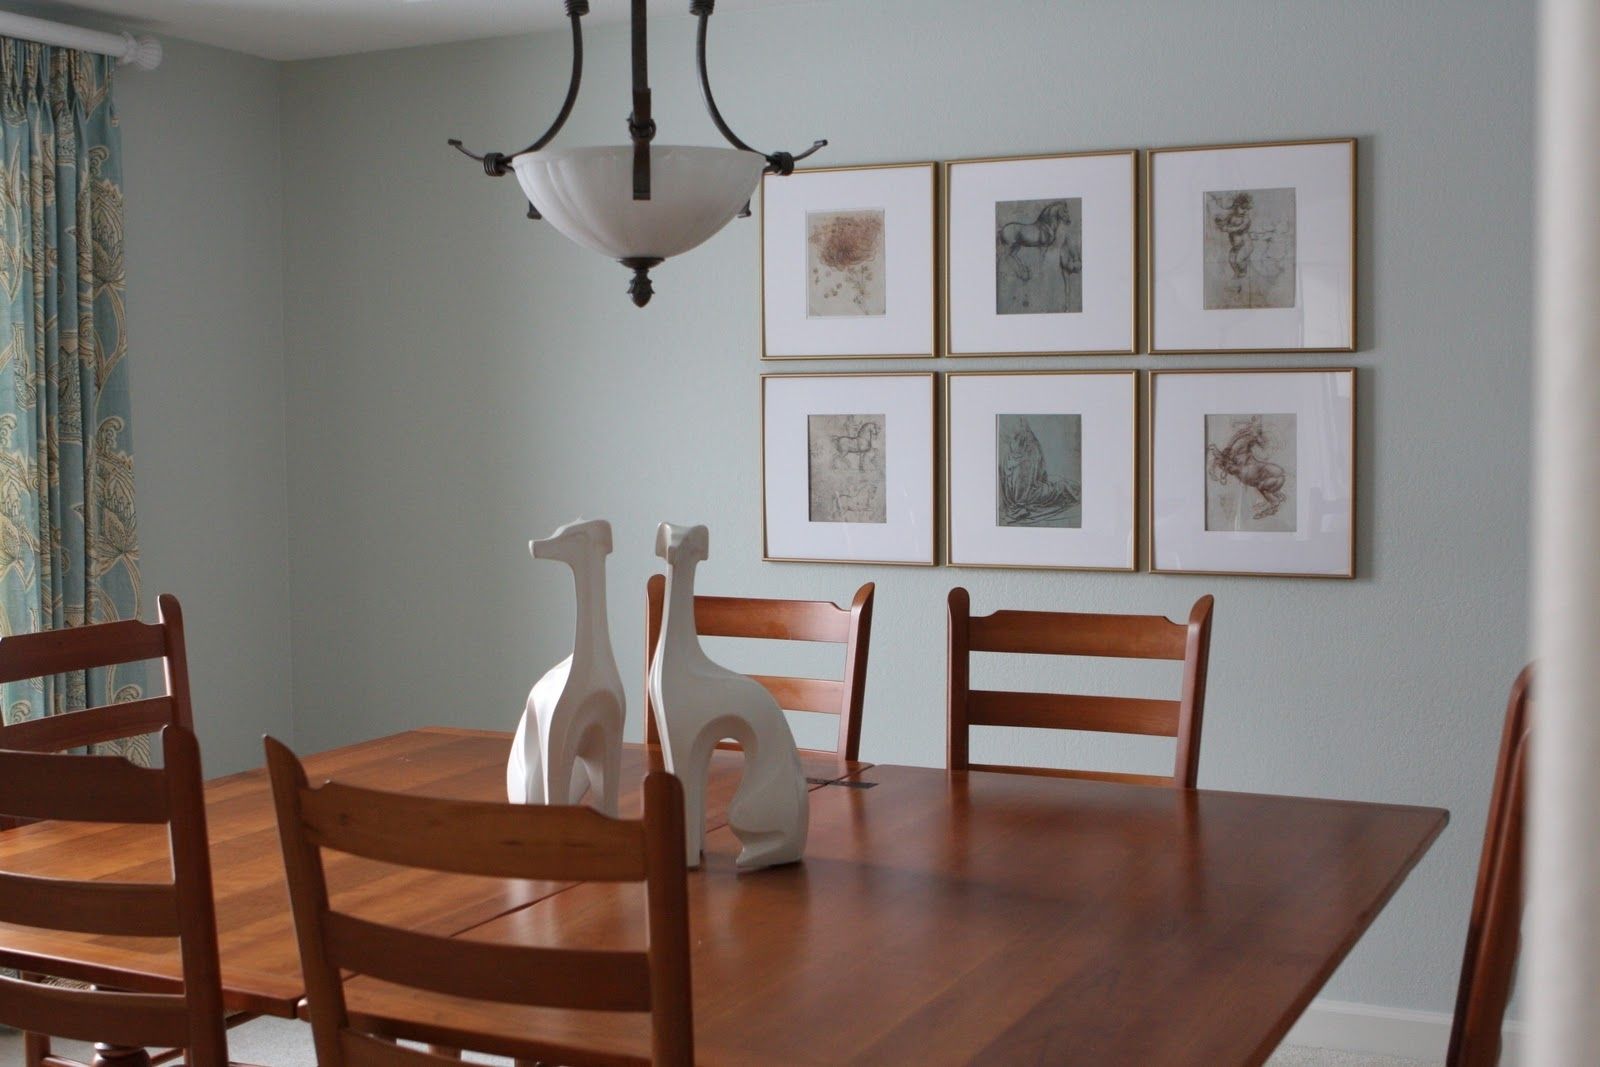 Dining Room Wall Art Contemporary With Photos Of Dining Room Decor With Regard To Wall Art For Dining Room (View 4 of 20)